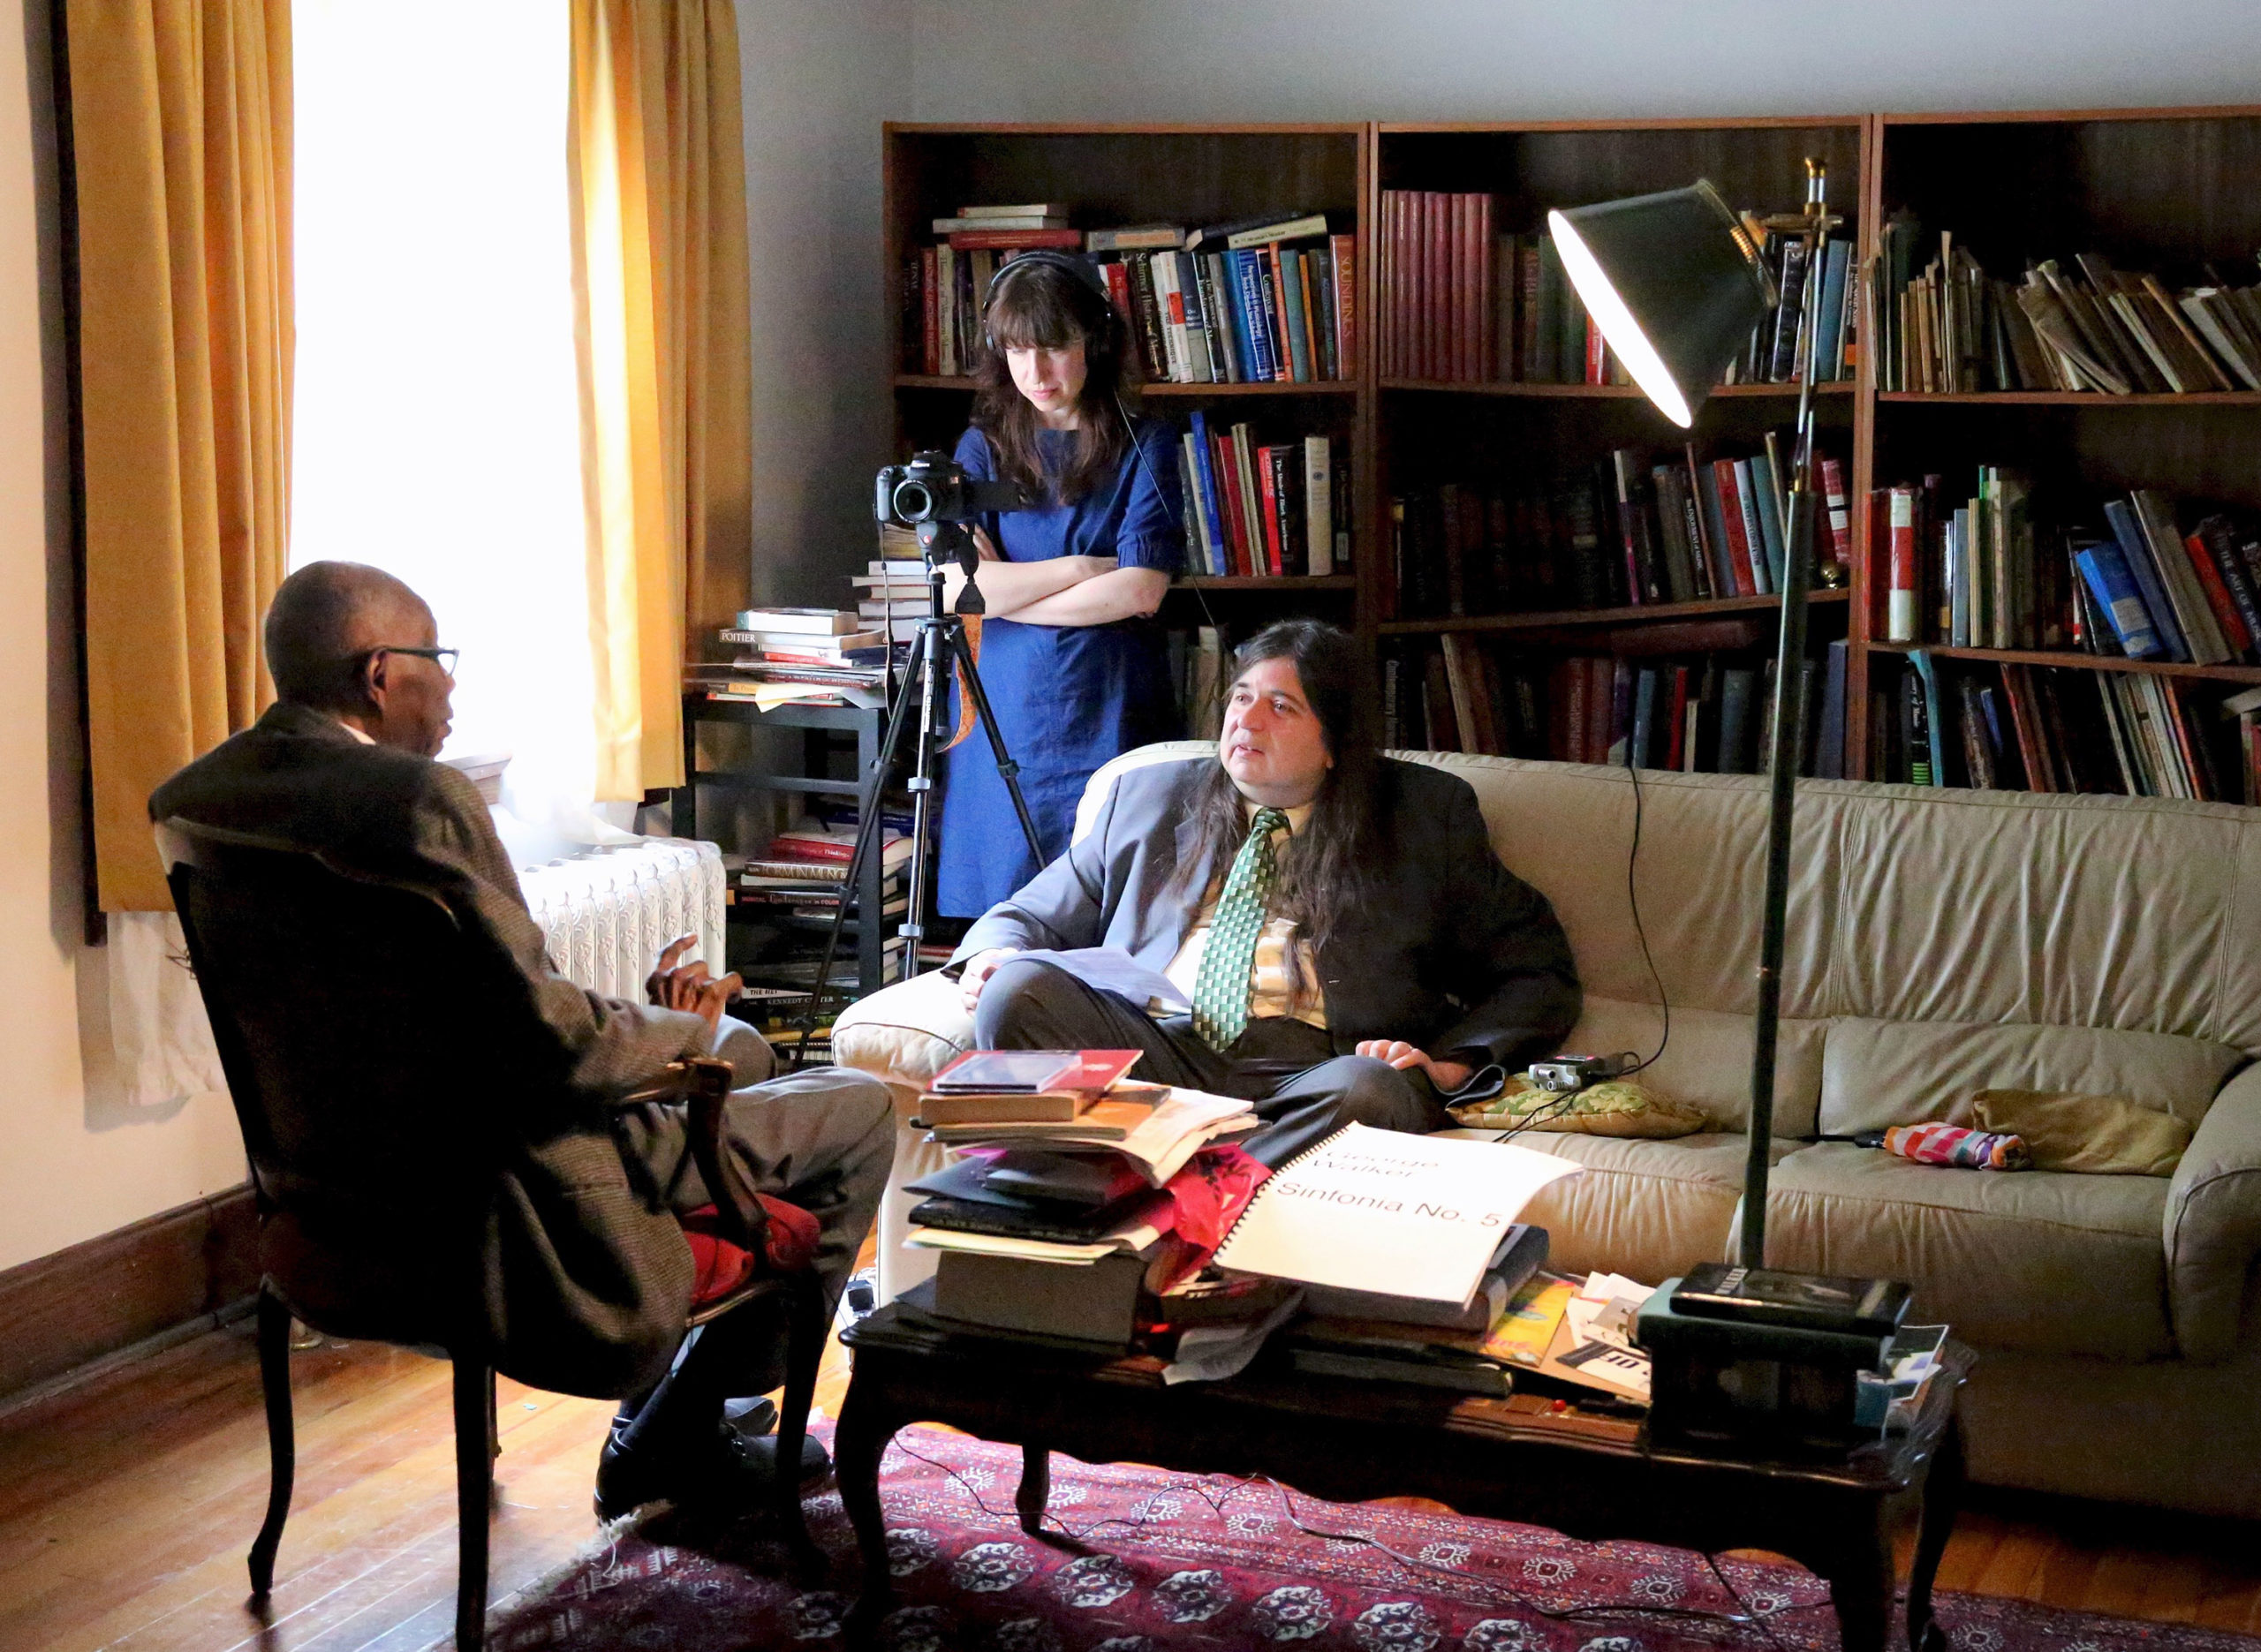 An interview takes place in a study-type room, with a man sitting on a couch, another man with his back to us sitting in a chair, and a woman in a blue dress behind the camera filming